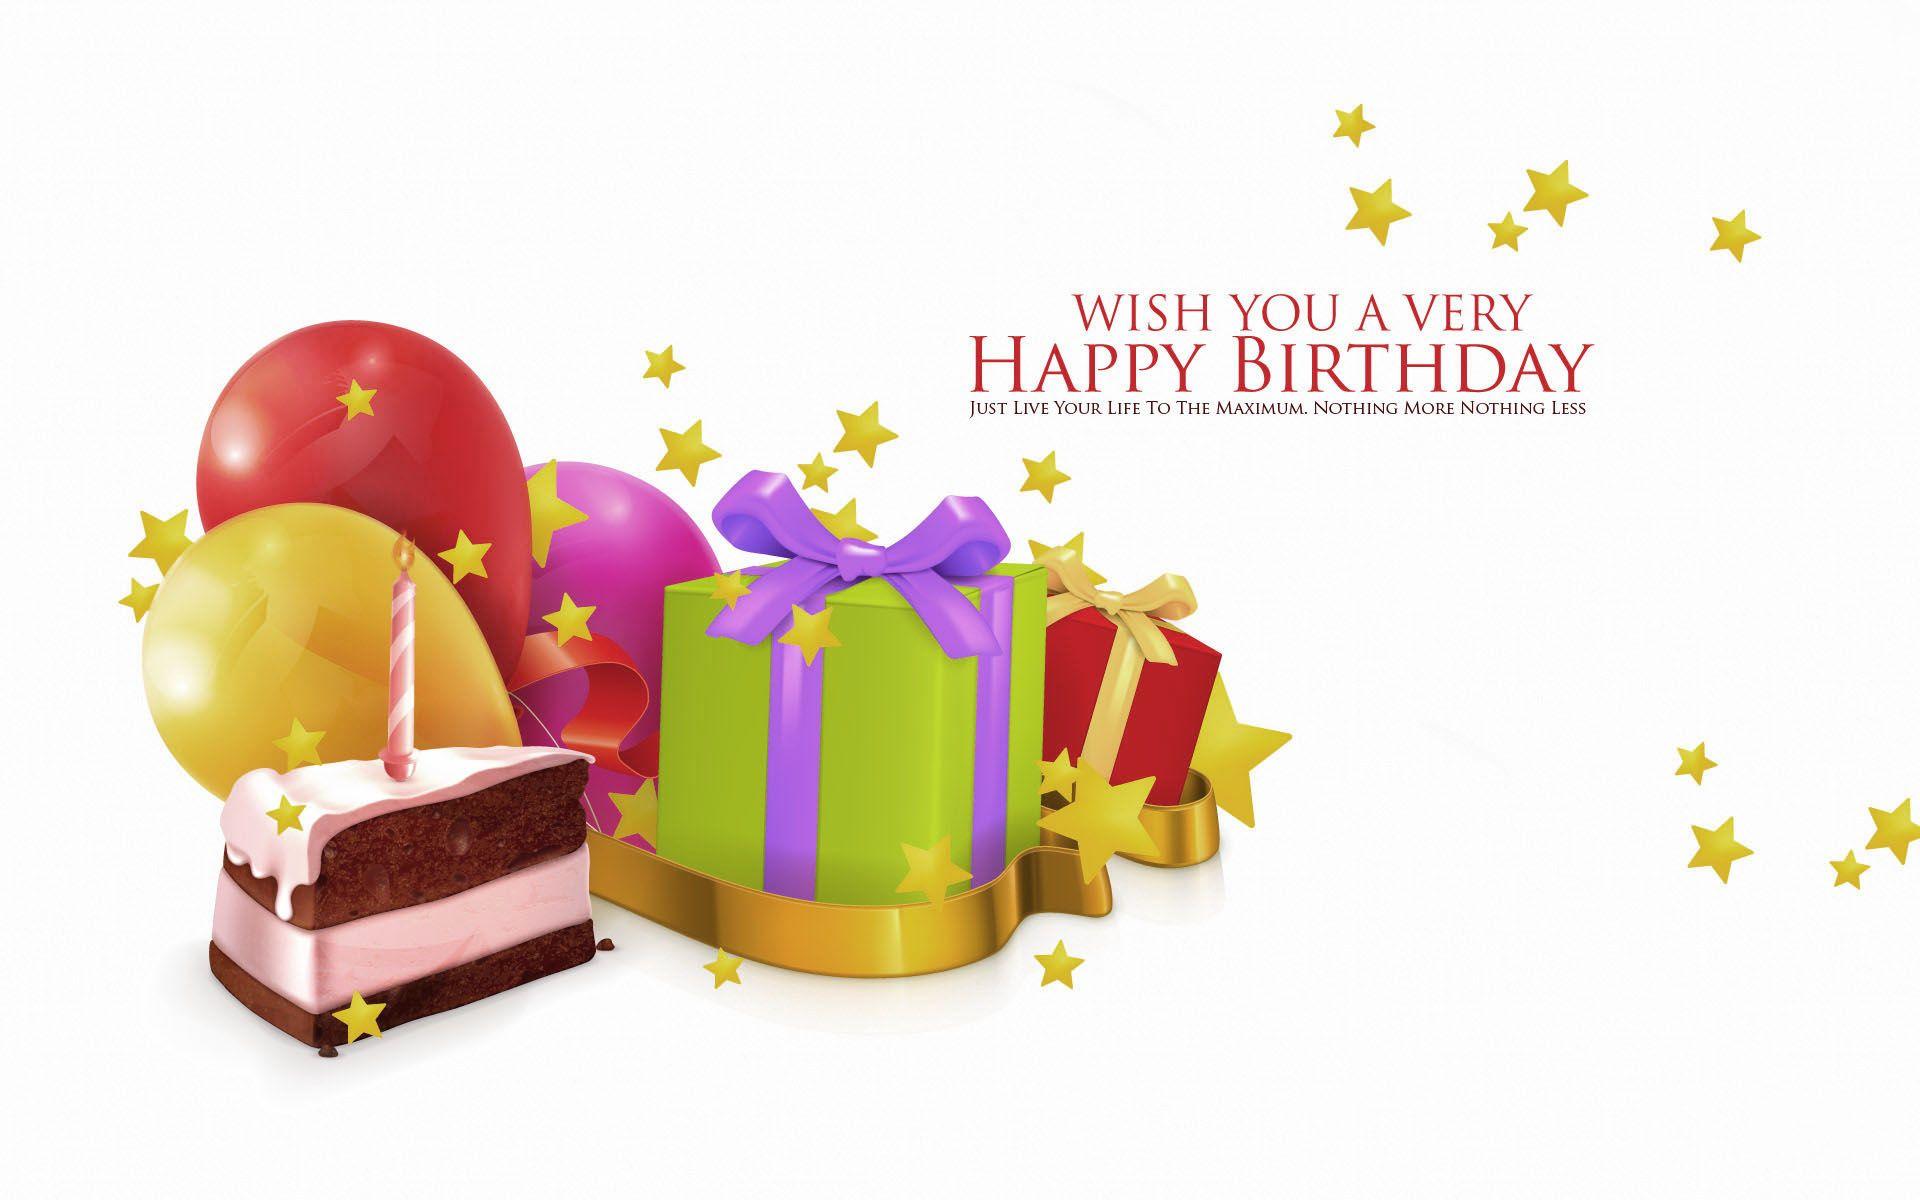 Birthday Gifts Wallpapers - Top Free Birthday Gifts Backgrounds ...